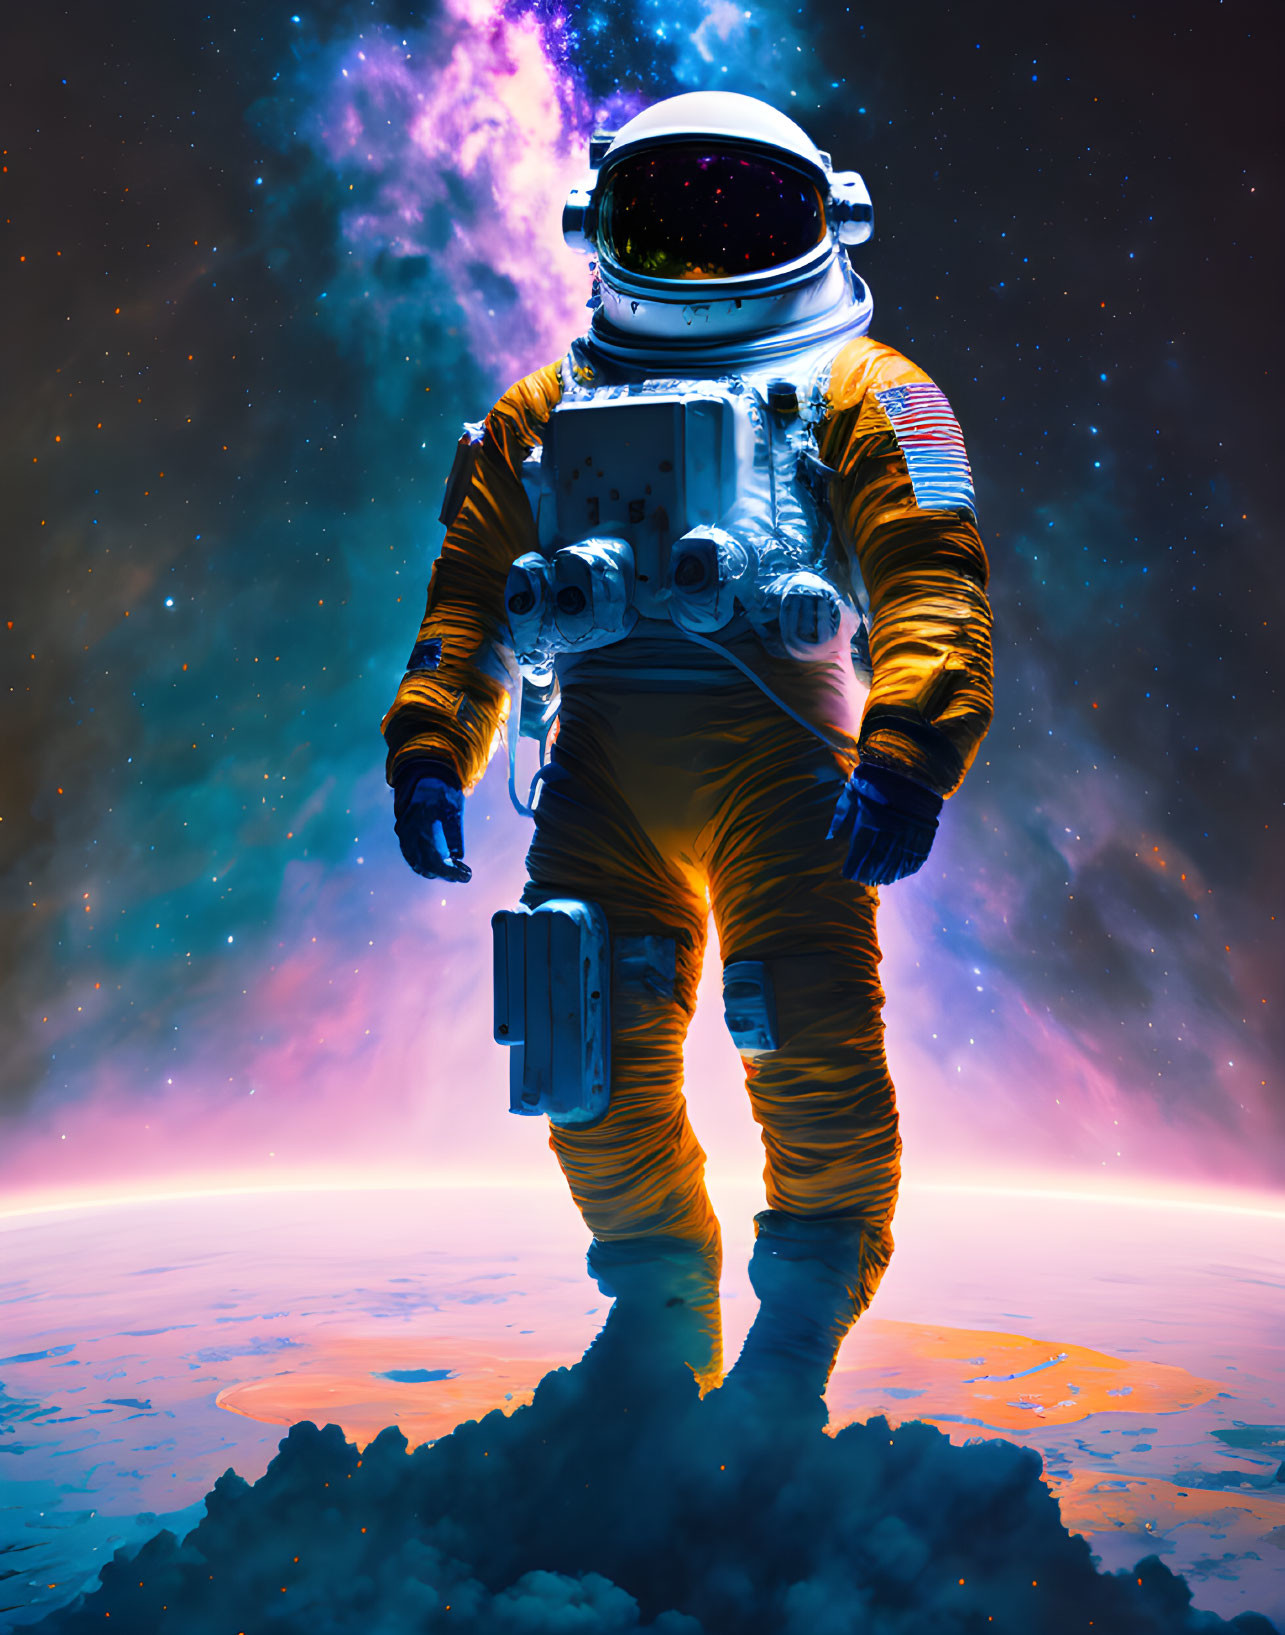 Astronaut in spacesuit on celestial body with vibrant nebula and stars